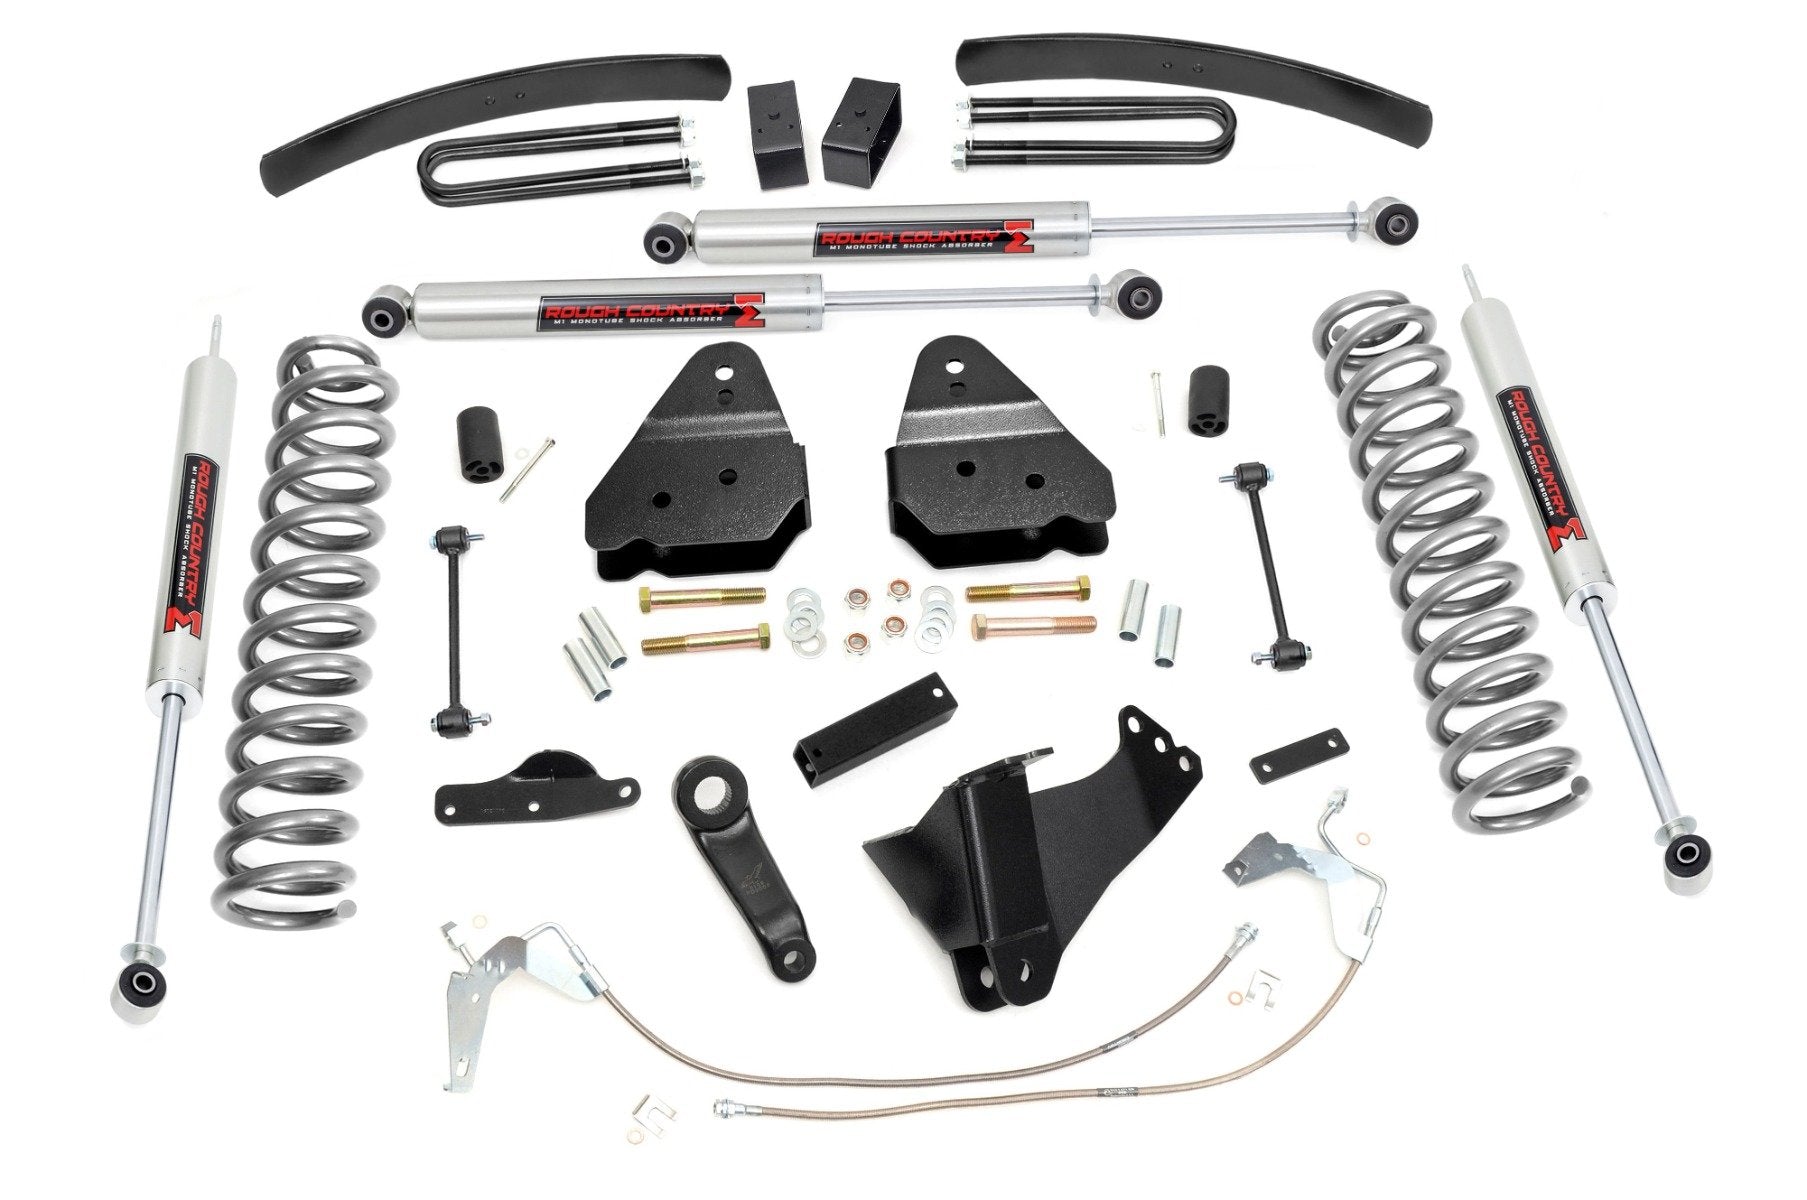 Rough Country 6 Inch Lift Kit | Gas | M1 | Ford F-250/F-350 Super Duty 4WD (2008-2010)